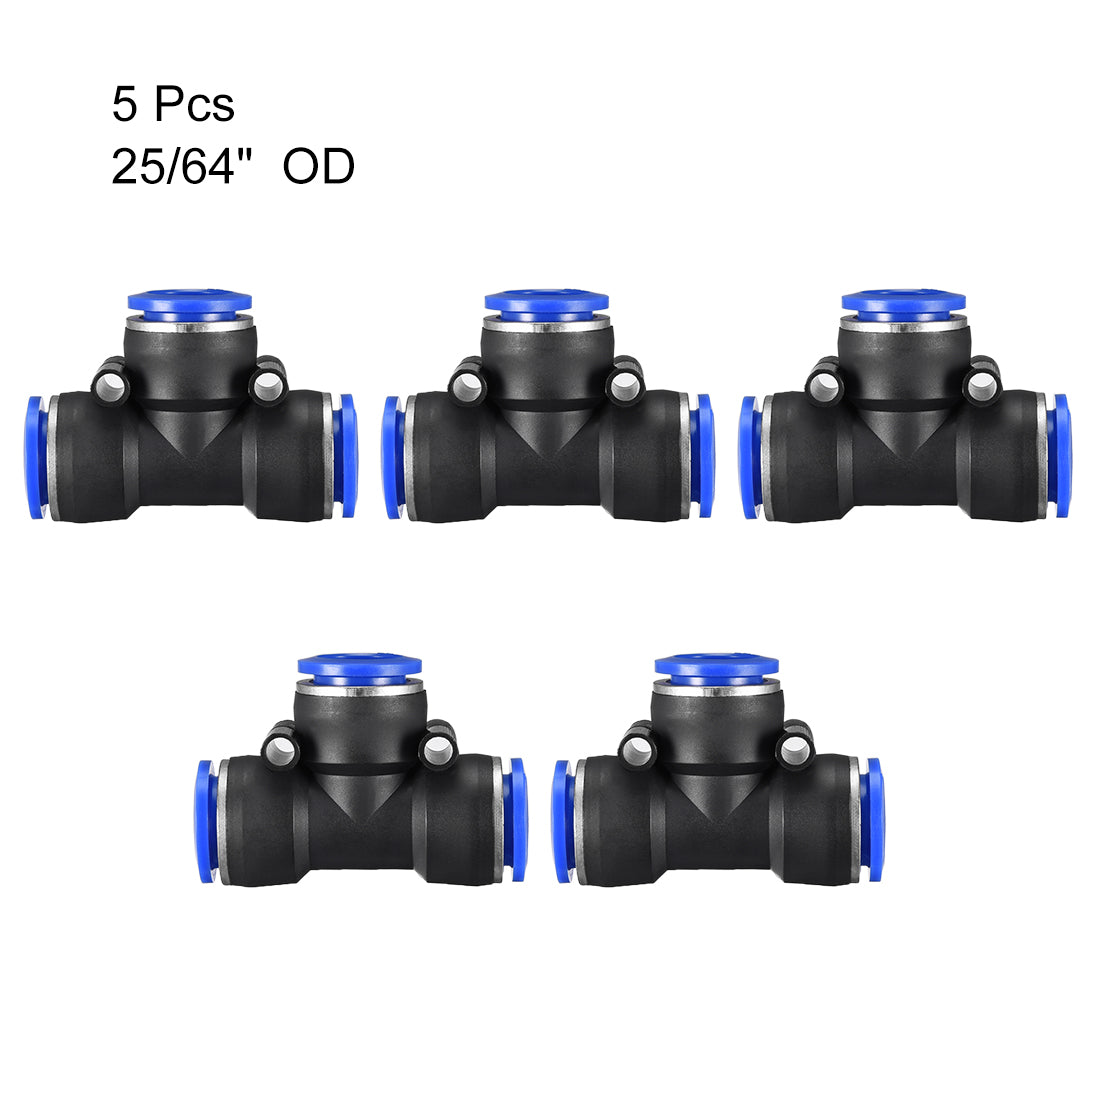 uxcell Uxcell 5pcs Push To Connect Fittings T Type Tube Connect 10 mm or 25/64" od Push Fit Fittings Tube Fittings Push Lock Blue (10mm T tee)